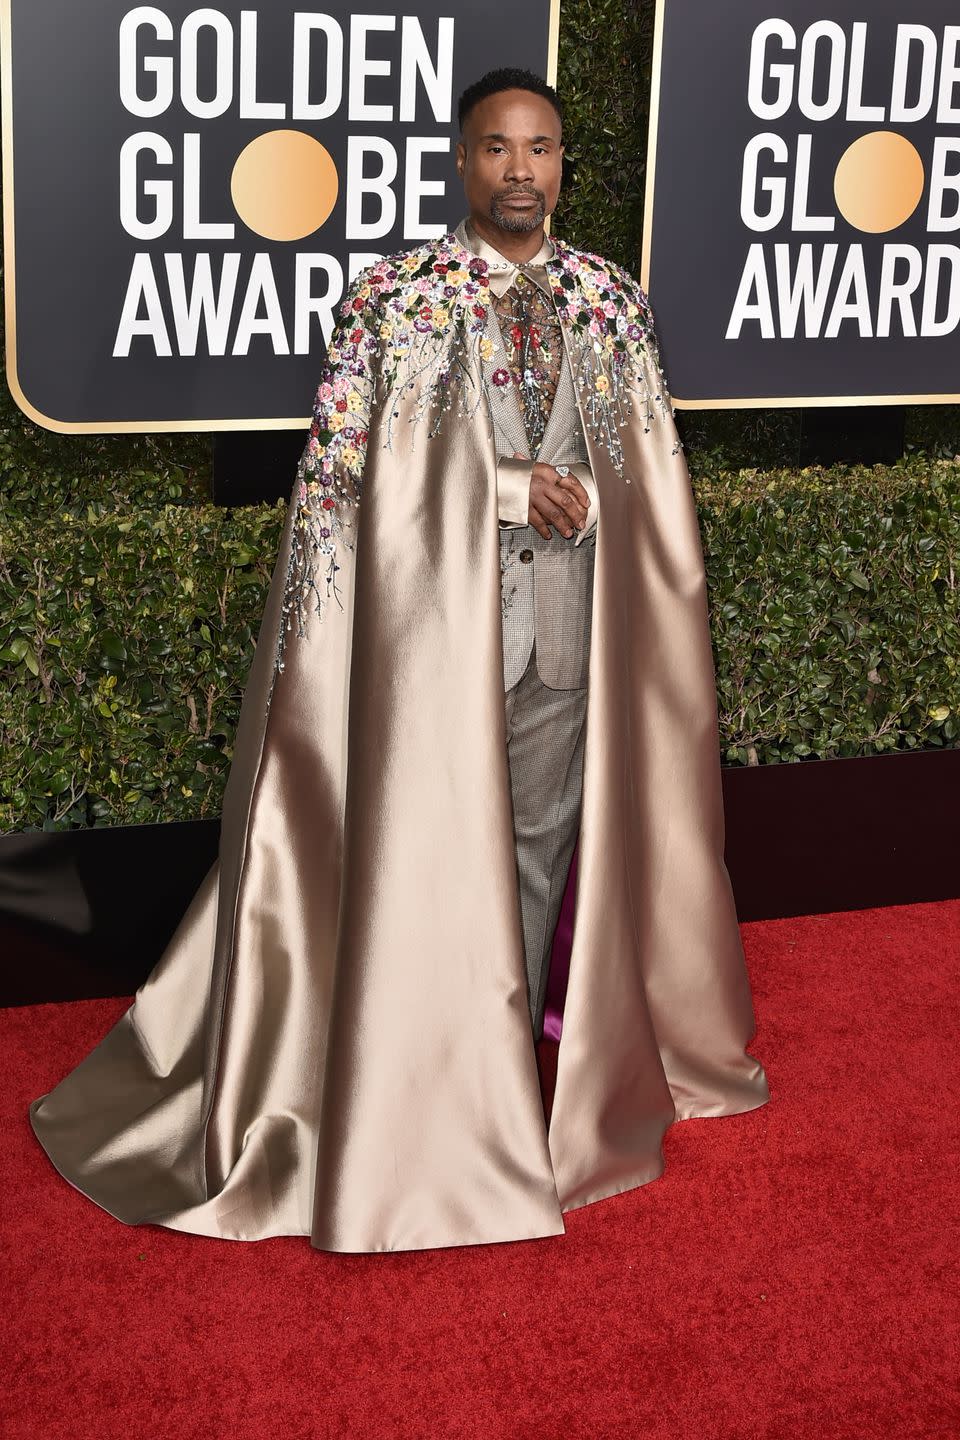 44) Billy Porter at the Golden Globes, January 2019